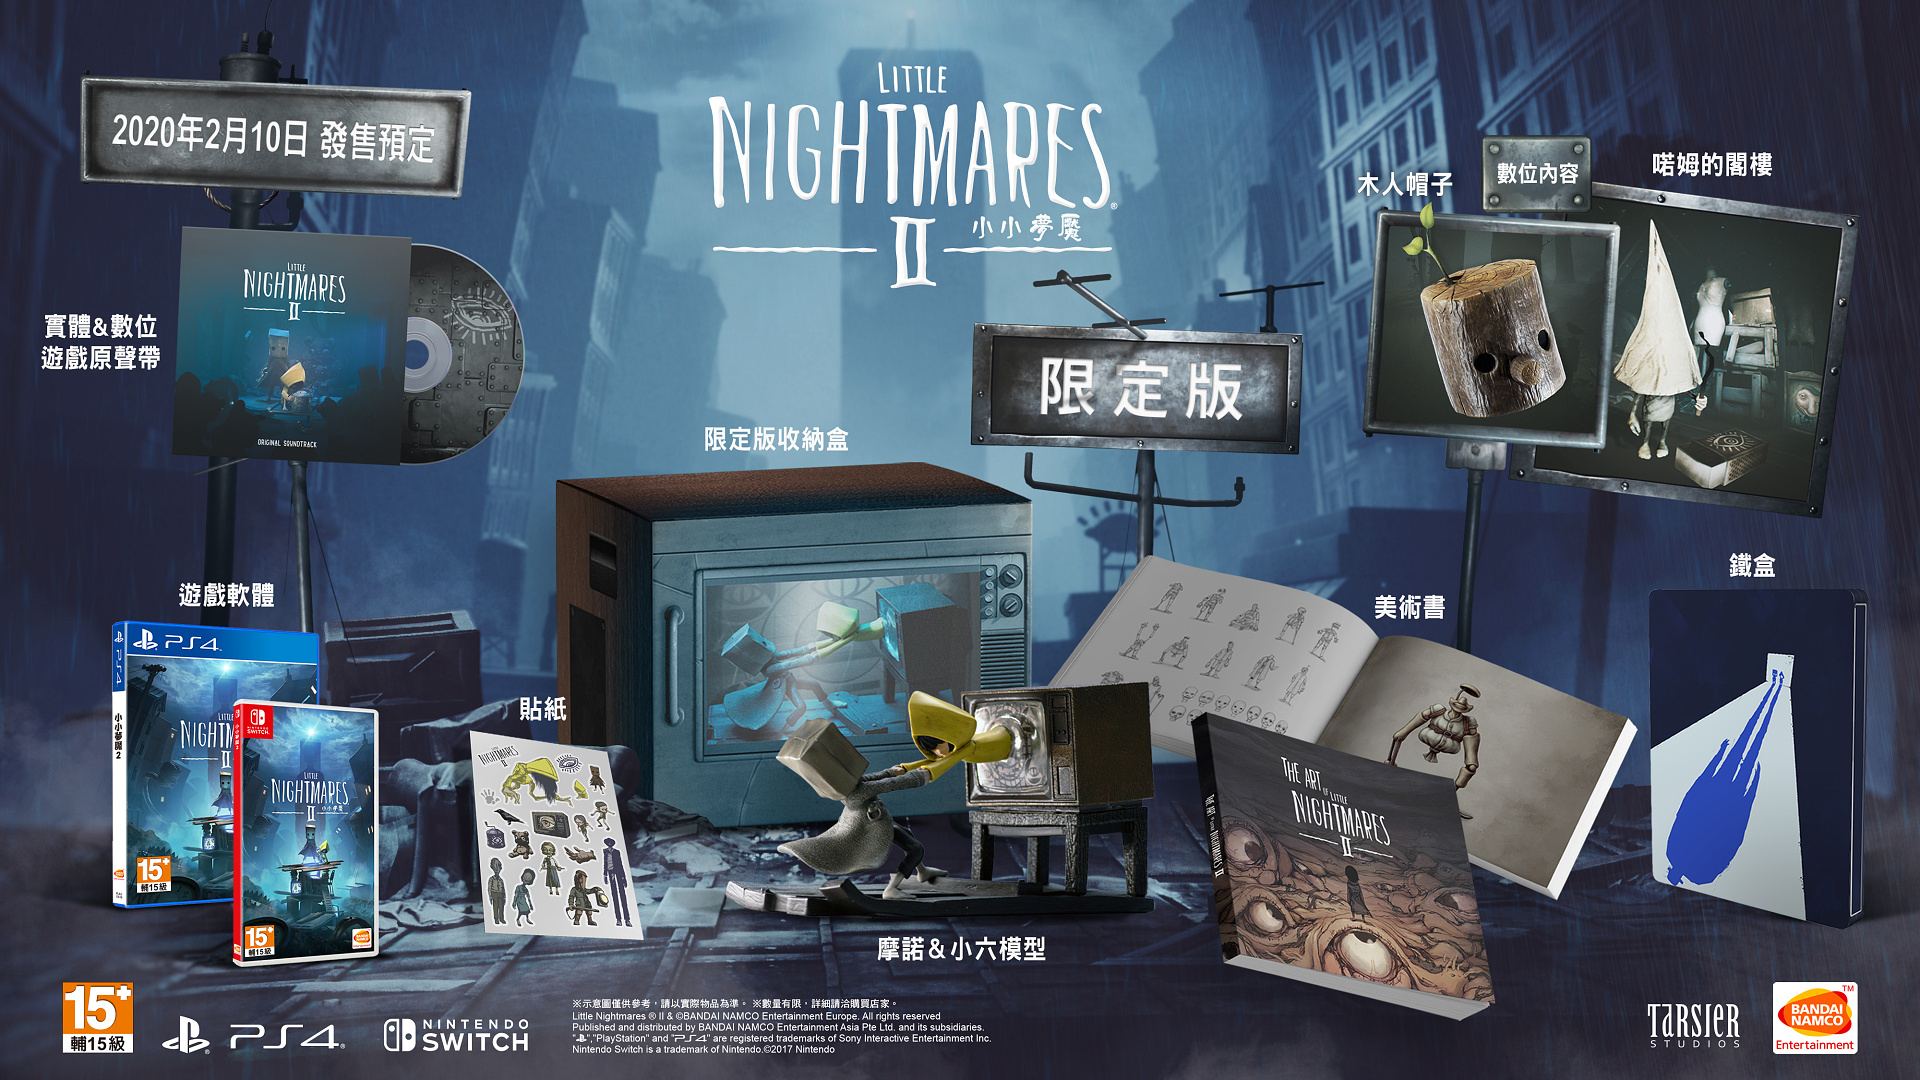 At Darren's World of Entertainment: Little Nightmares II: PS4 Review